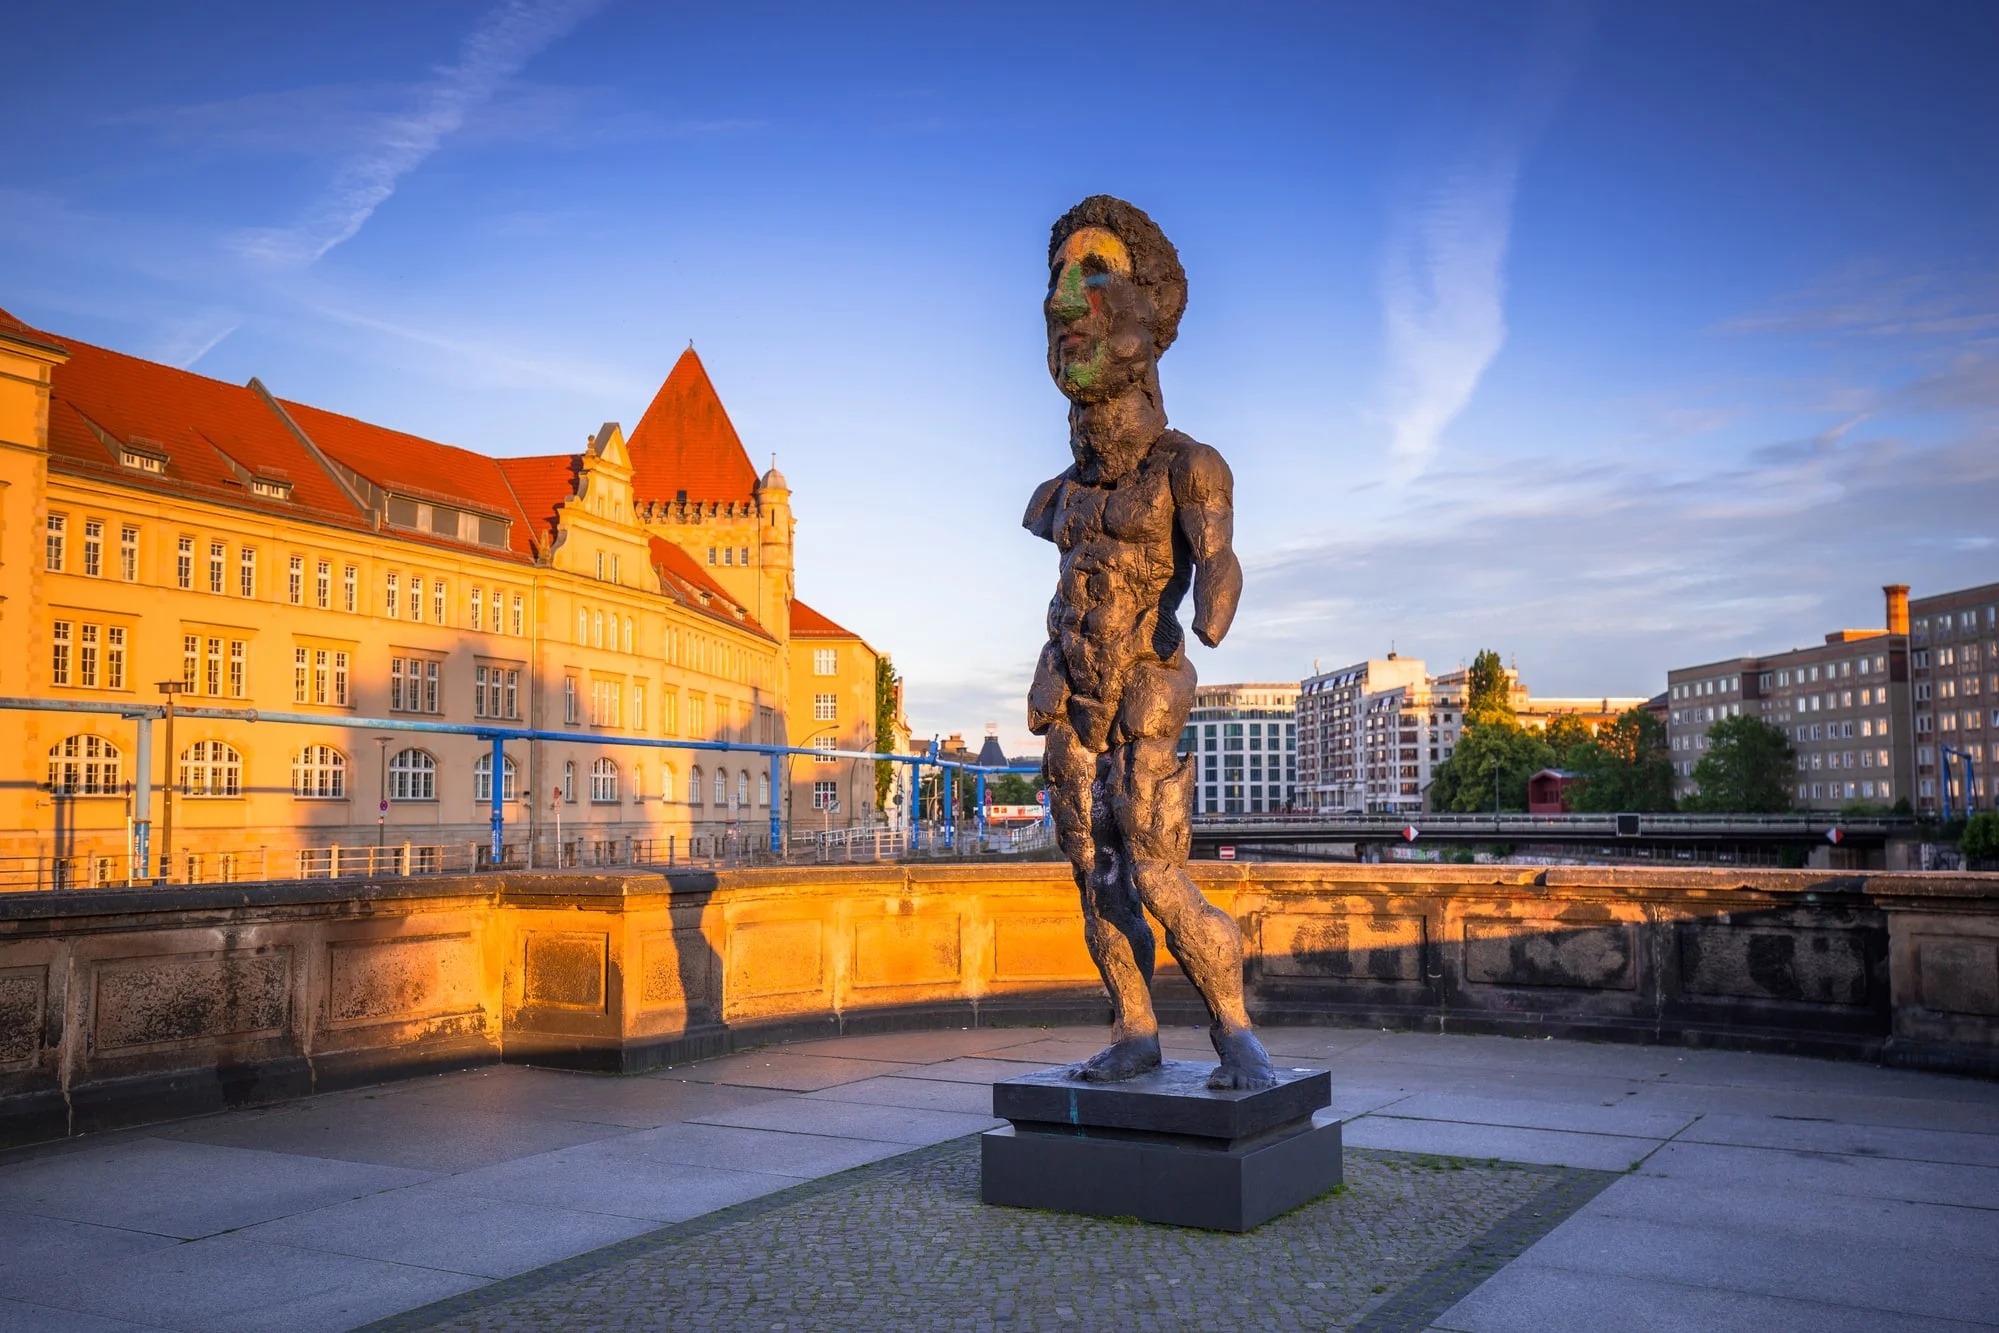 Art statue on museum island in Berlin at sunrise, Germany. Berlin is the capital and the largest city of Germany with a population of approximately 3.7 million people.